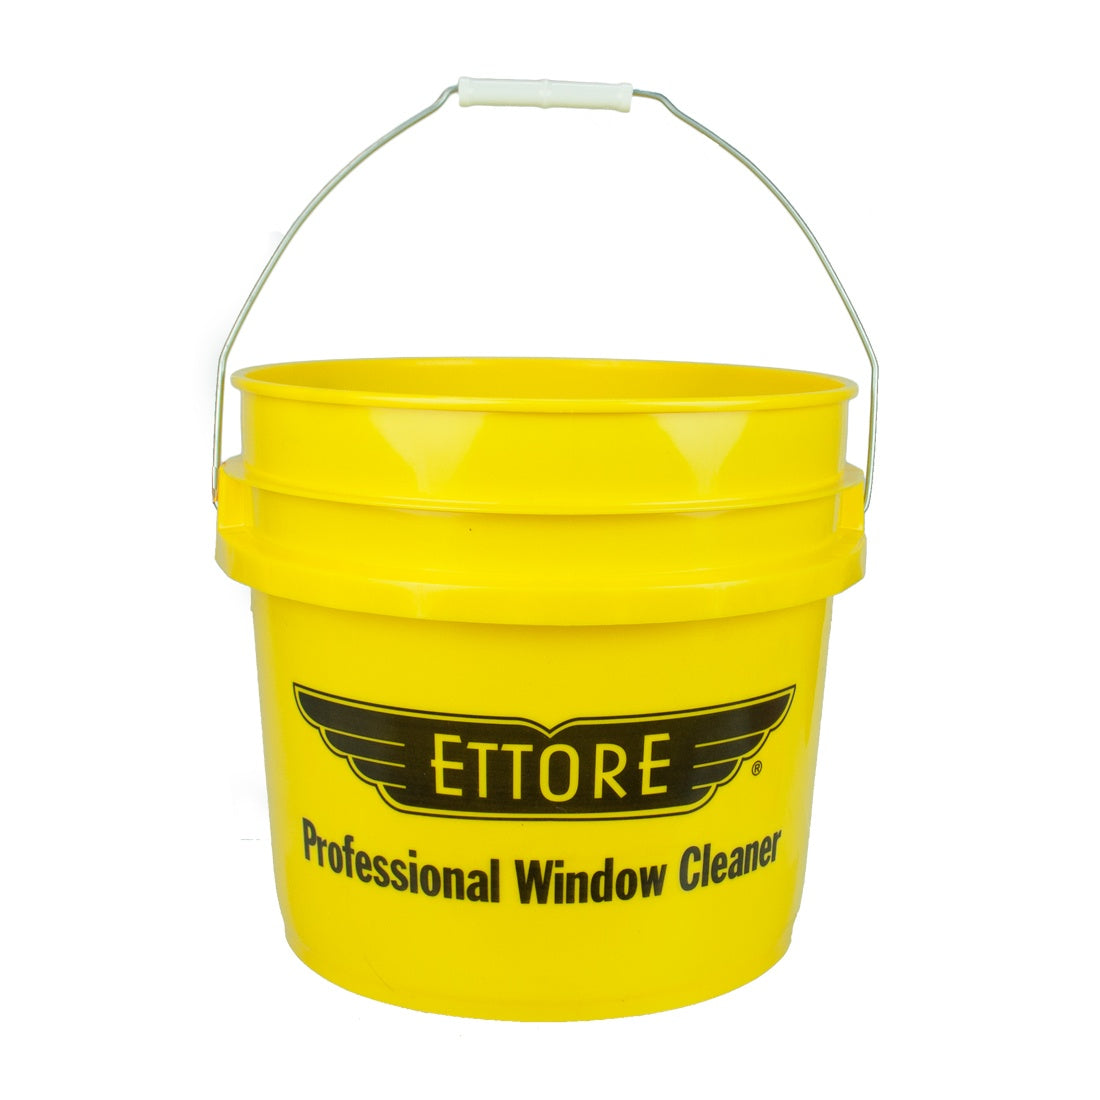 Ettore Bucket - 3.5 Gallon - Handle Up - Front View